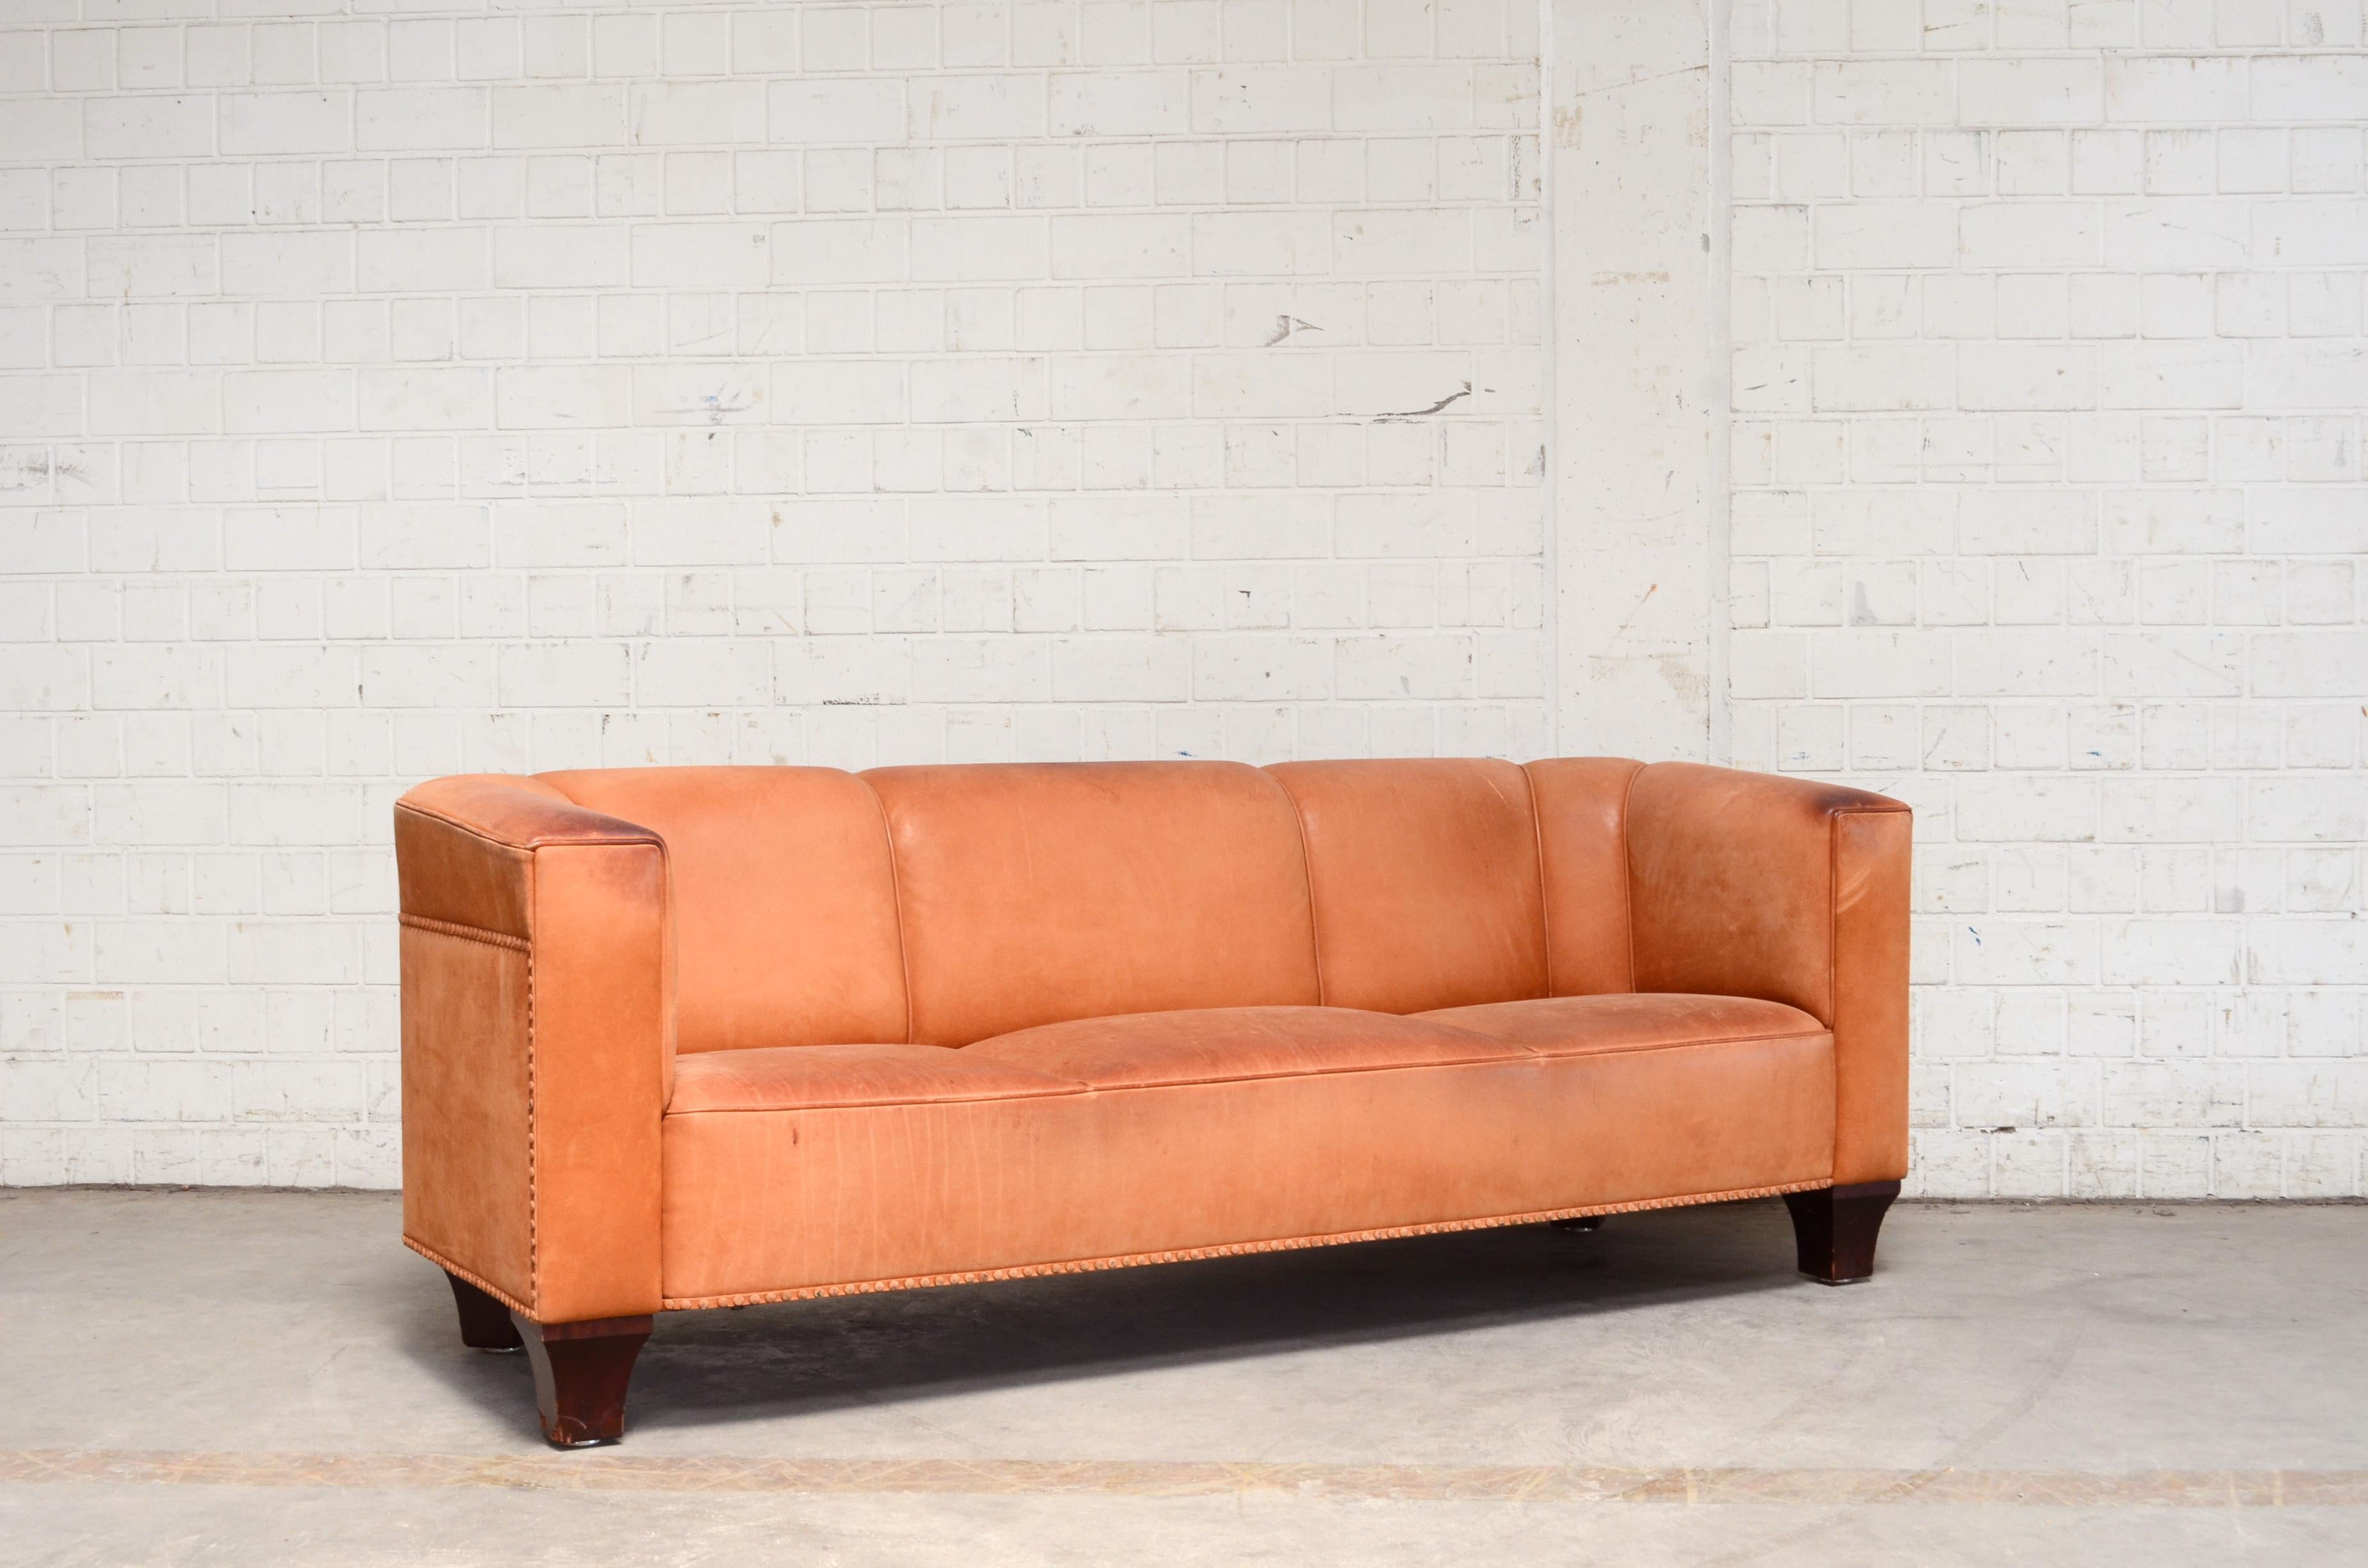 From Austrian designer Josef Hoffmann comes this great Palais Stoclet sofa.
Design year between 1905-1911 through the time of Art Nouveau and Vienna Secession for the mansion Palais Stoclet in Brussels Belgium.
This sofa was produced in the